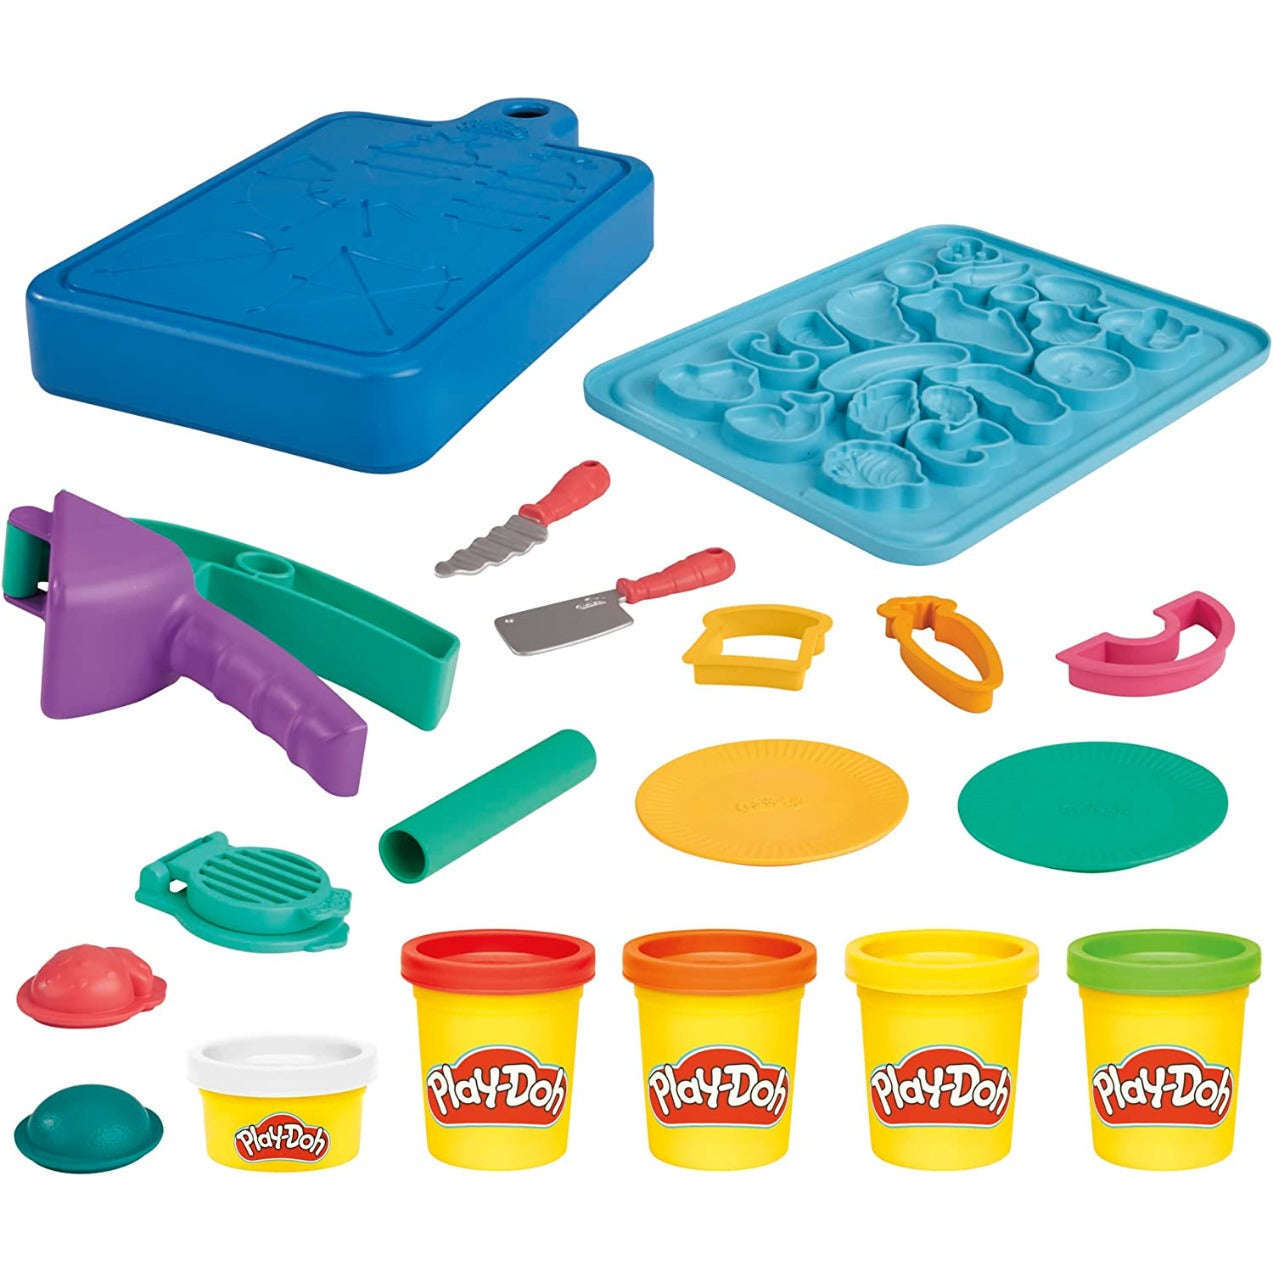 Toys N Tuck:Play-Doh Little Chef Starter Set,Play-Doh